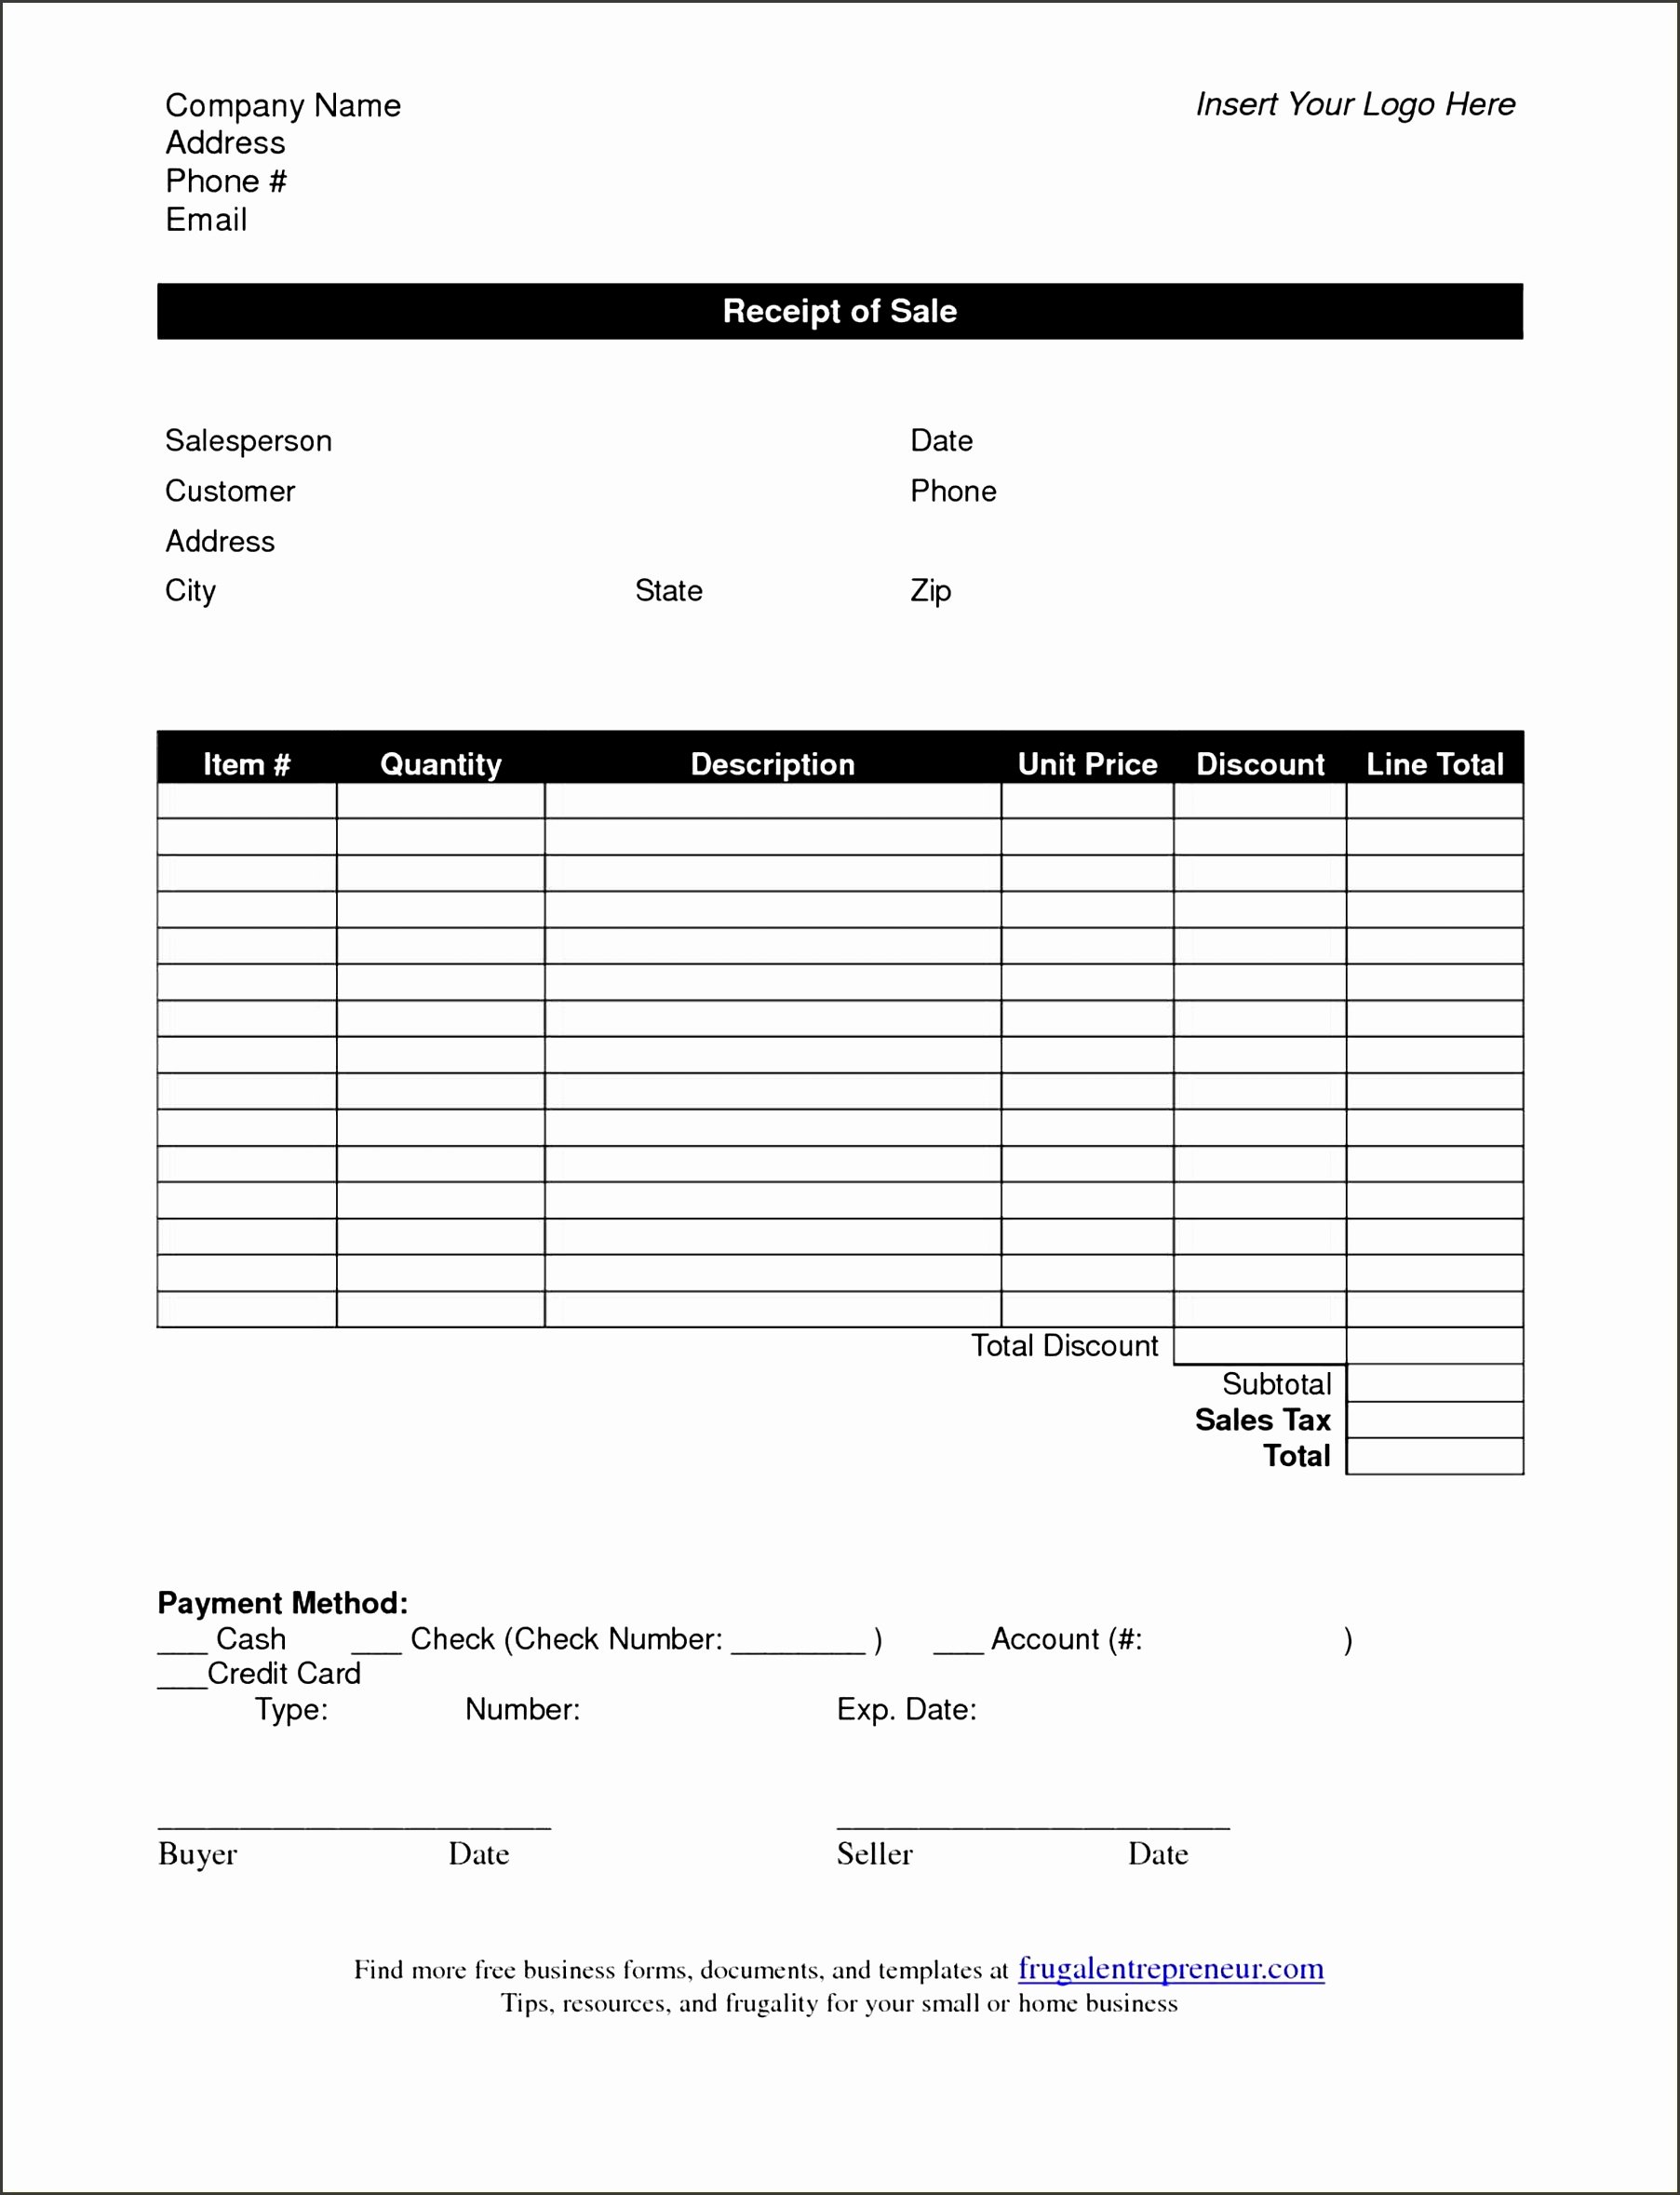 Sale Invoice Template Word Best Of 10 Blank Invoice Template for Sales Sampletemplatess